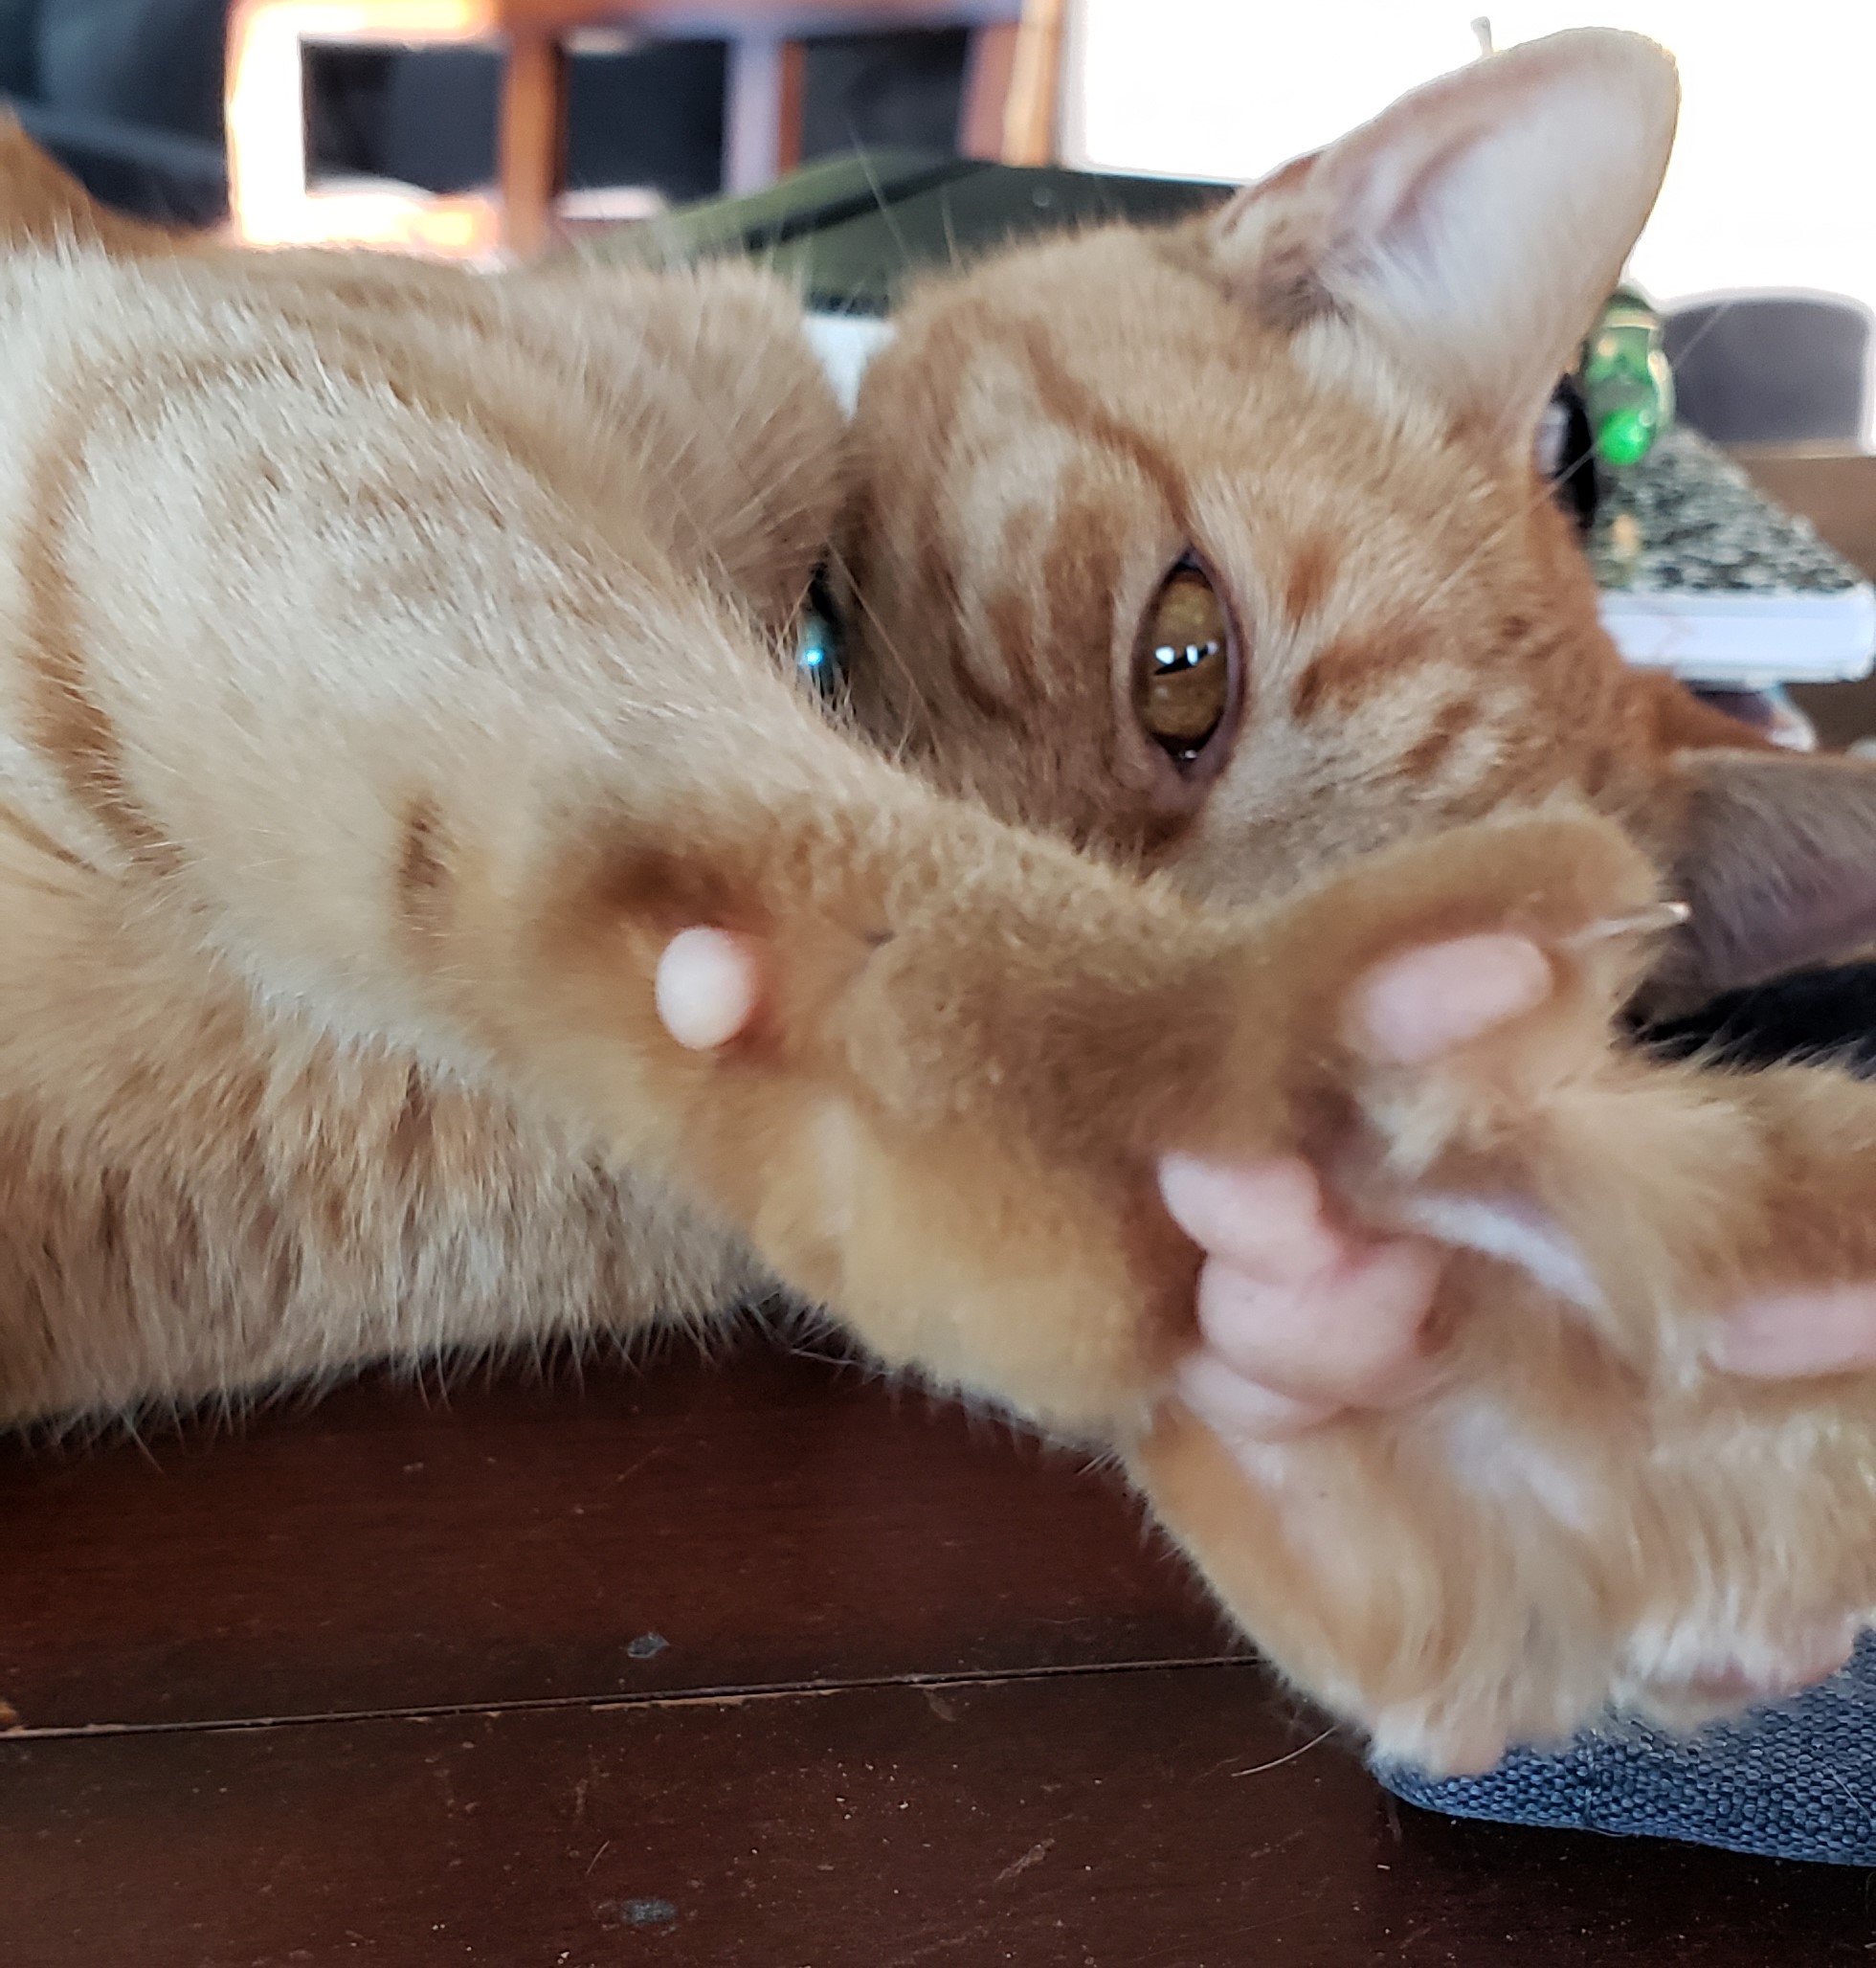 Photo is decorative, taken by this Tallahassee real estate agent and shows her cat's paw in the foreground with claws sticking out. She's not nice.